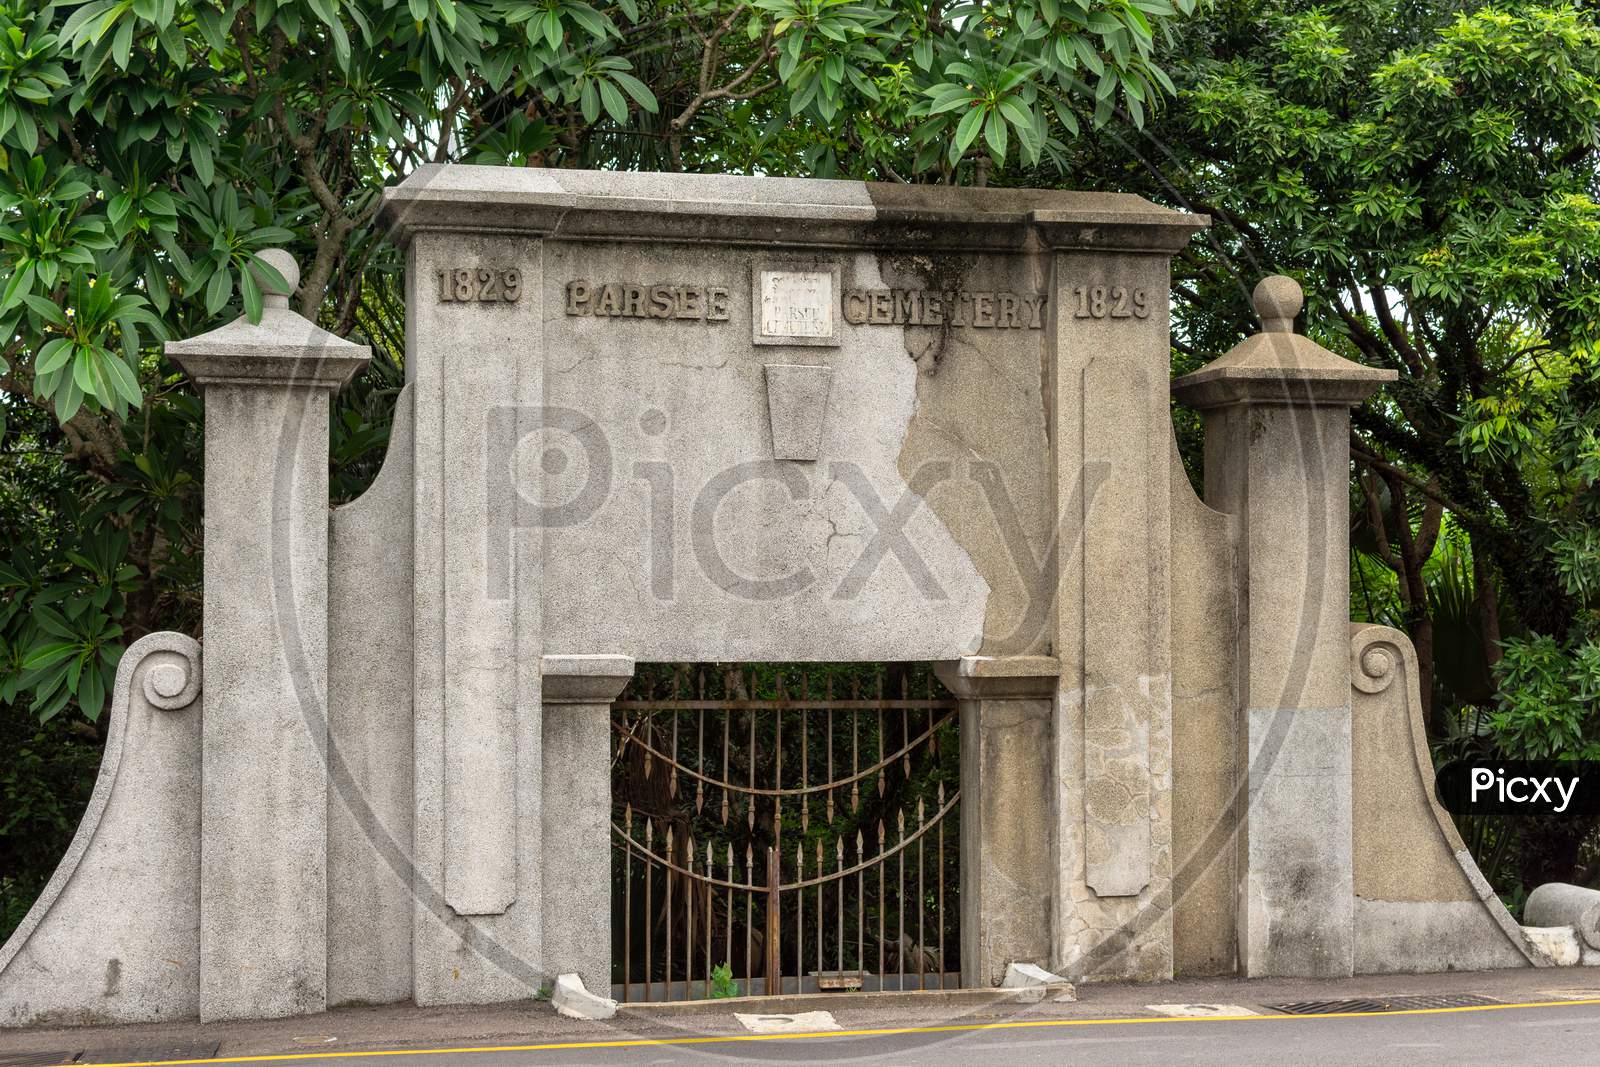 Parsee Cemetery, Old Colonial Cemetary In Sar Macau, China